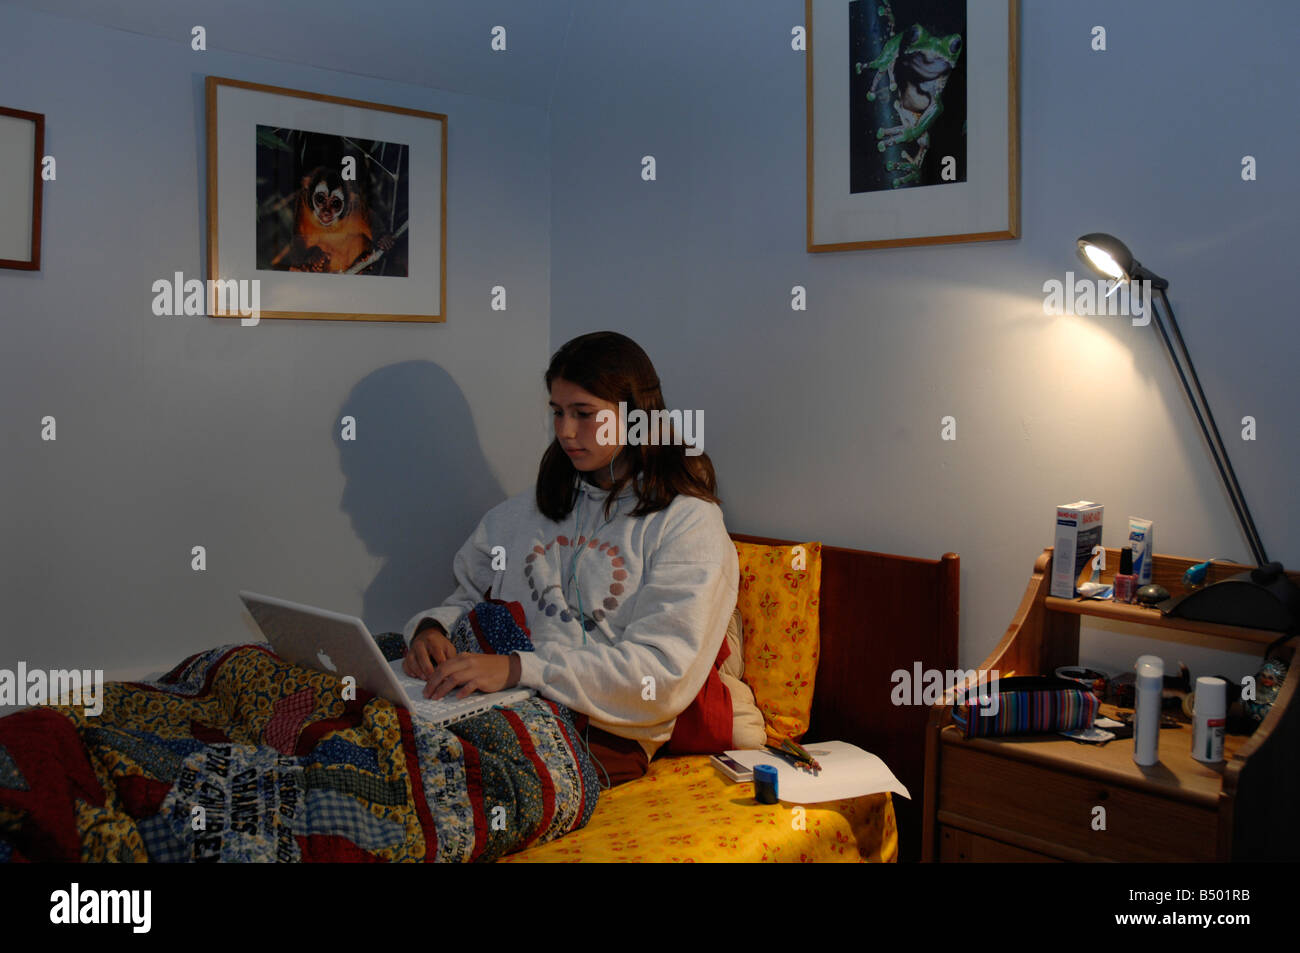 10 4 16 year old girl surfs the web in her bedroom Stock Photo